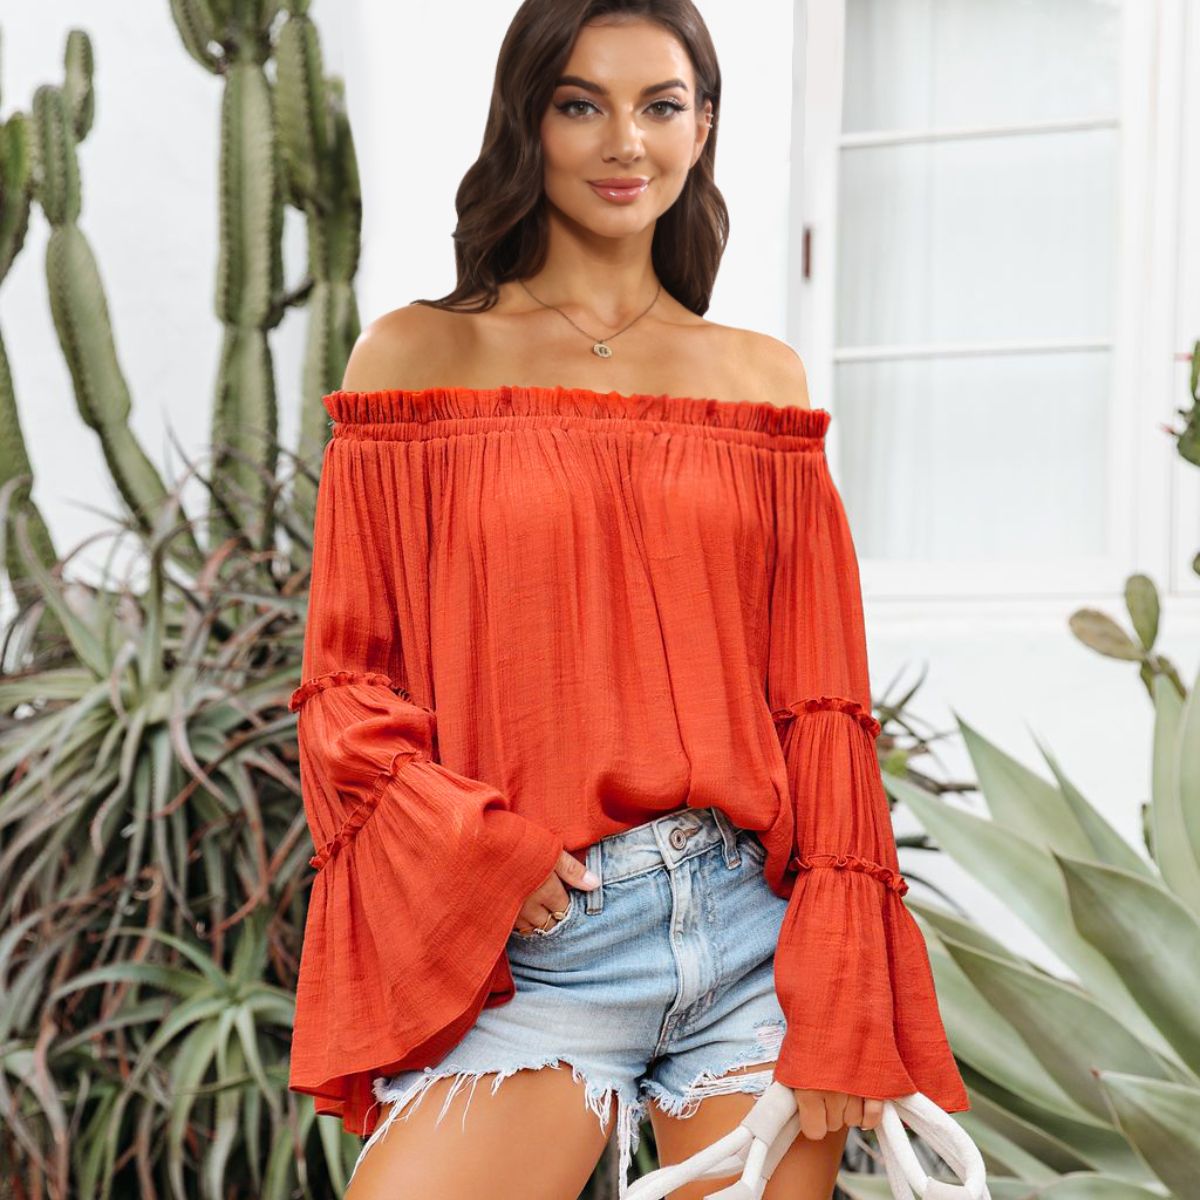 Off-Shoulder Frill Trim Blouse - Orange / S - Women’s Clothing & Accessories - Shirts & Tops - 1 - 2024